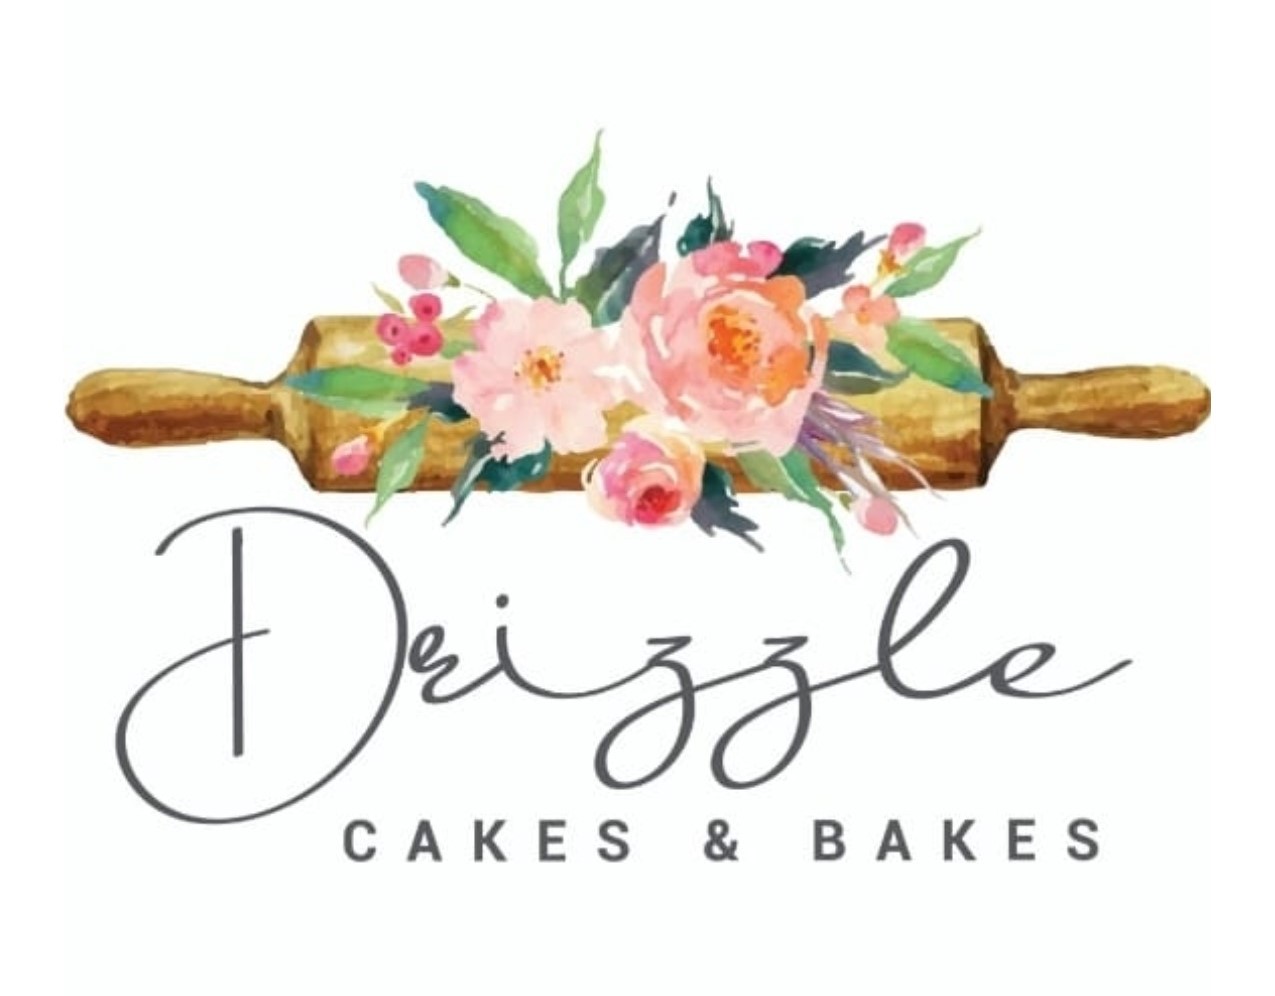 The words drizzle cakes & bakes in black and a rolling pin with pink flowers